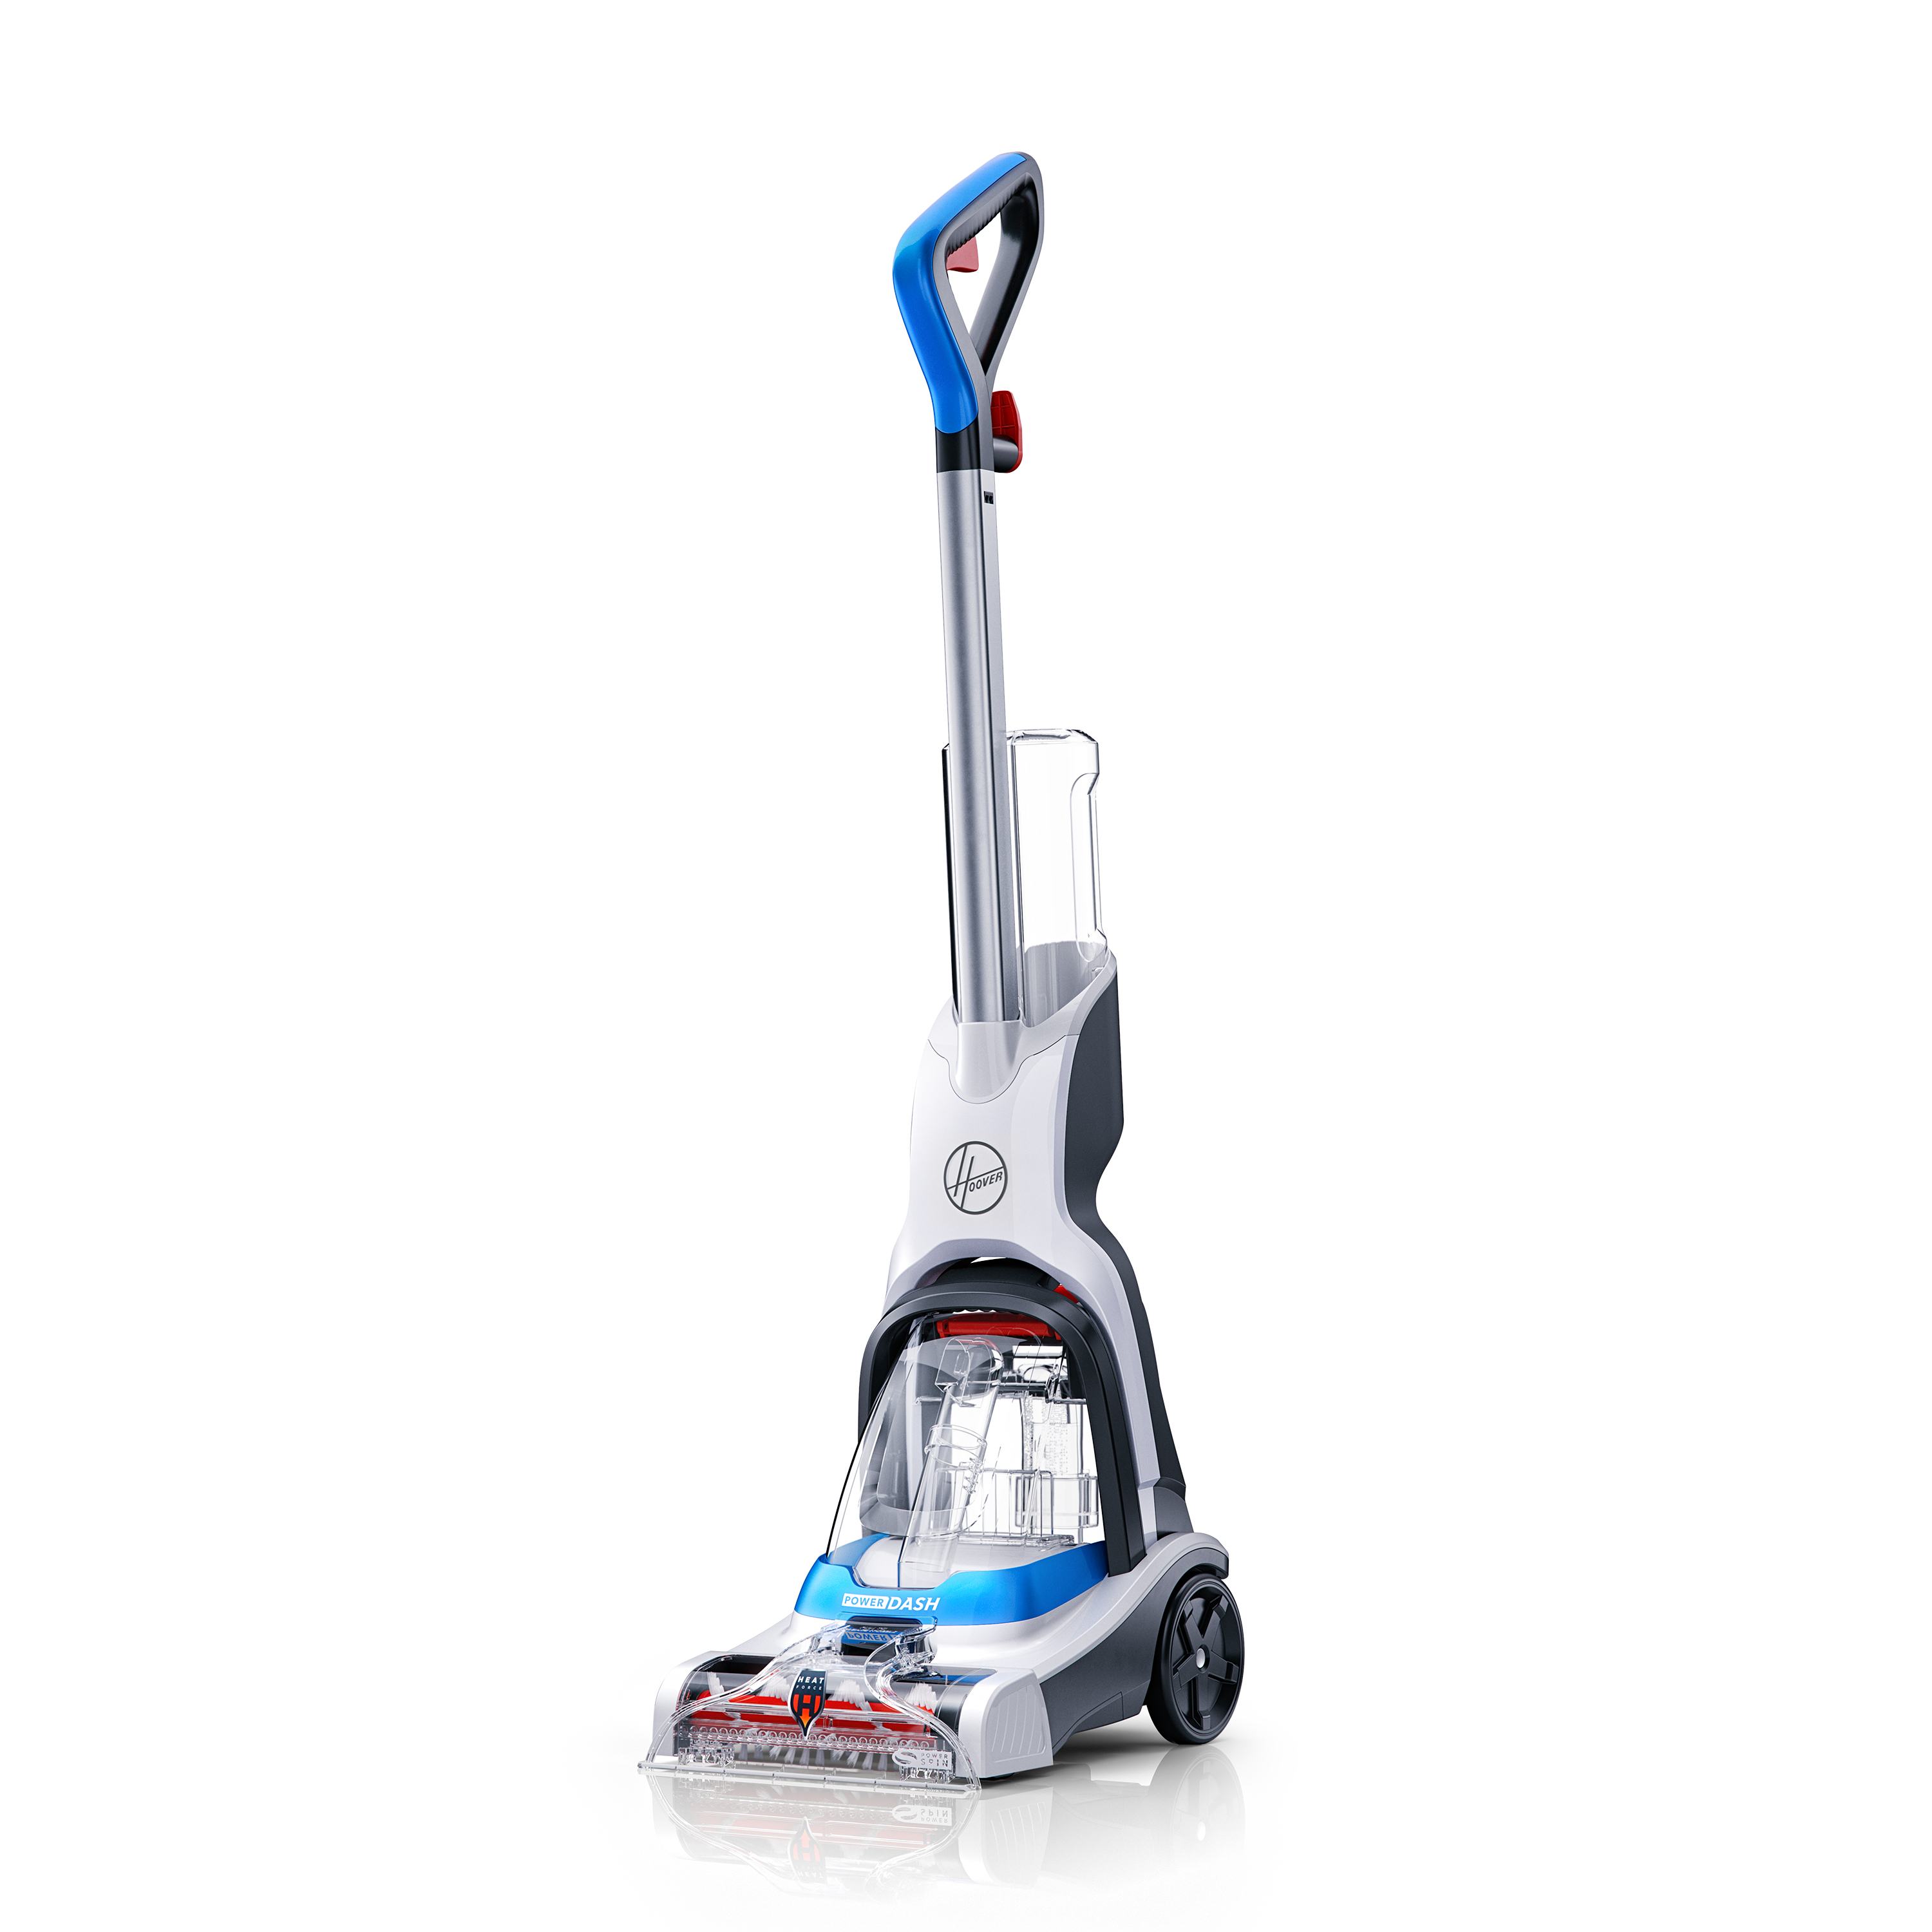 Hoover PowerDash Pet, Upright Carpet Cleaner Machine with Clean Pack Carpet Cleaner Solution Pod Samples, FH50712 - image 17 of 17